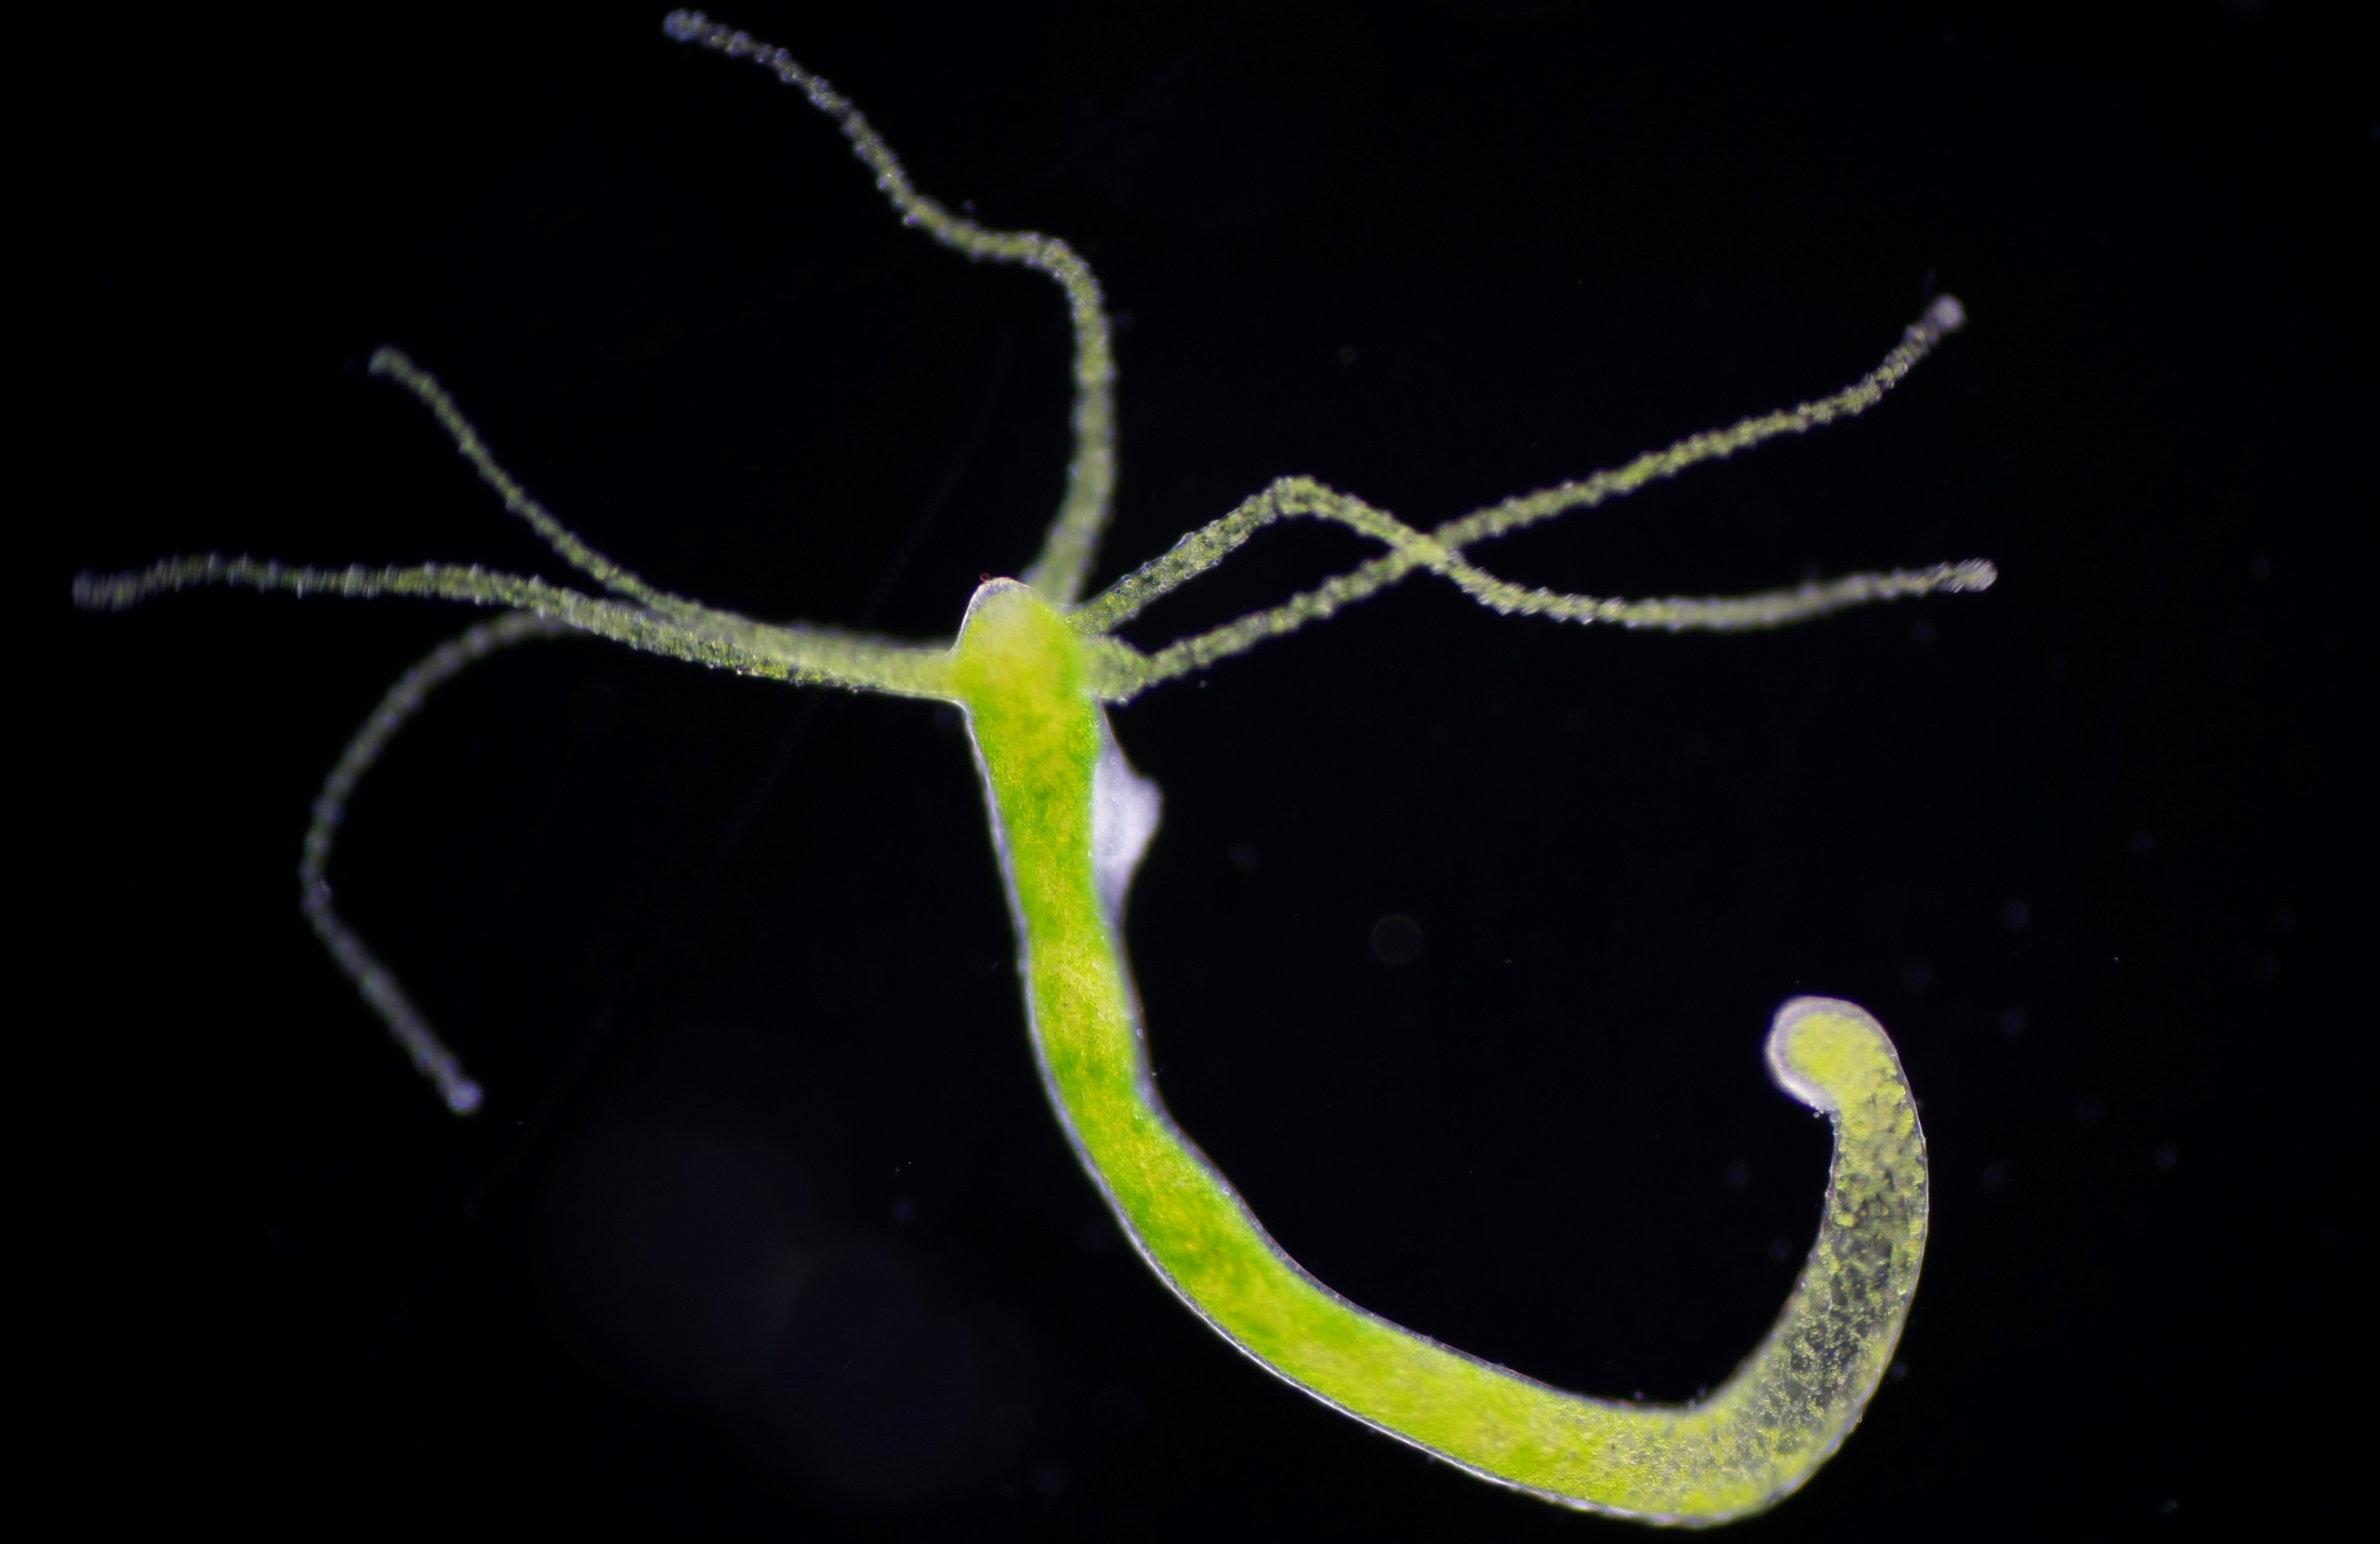 A photo of a Hydra, the small invertebrates that could be immortal.